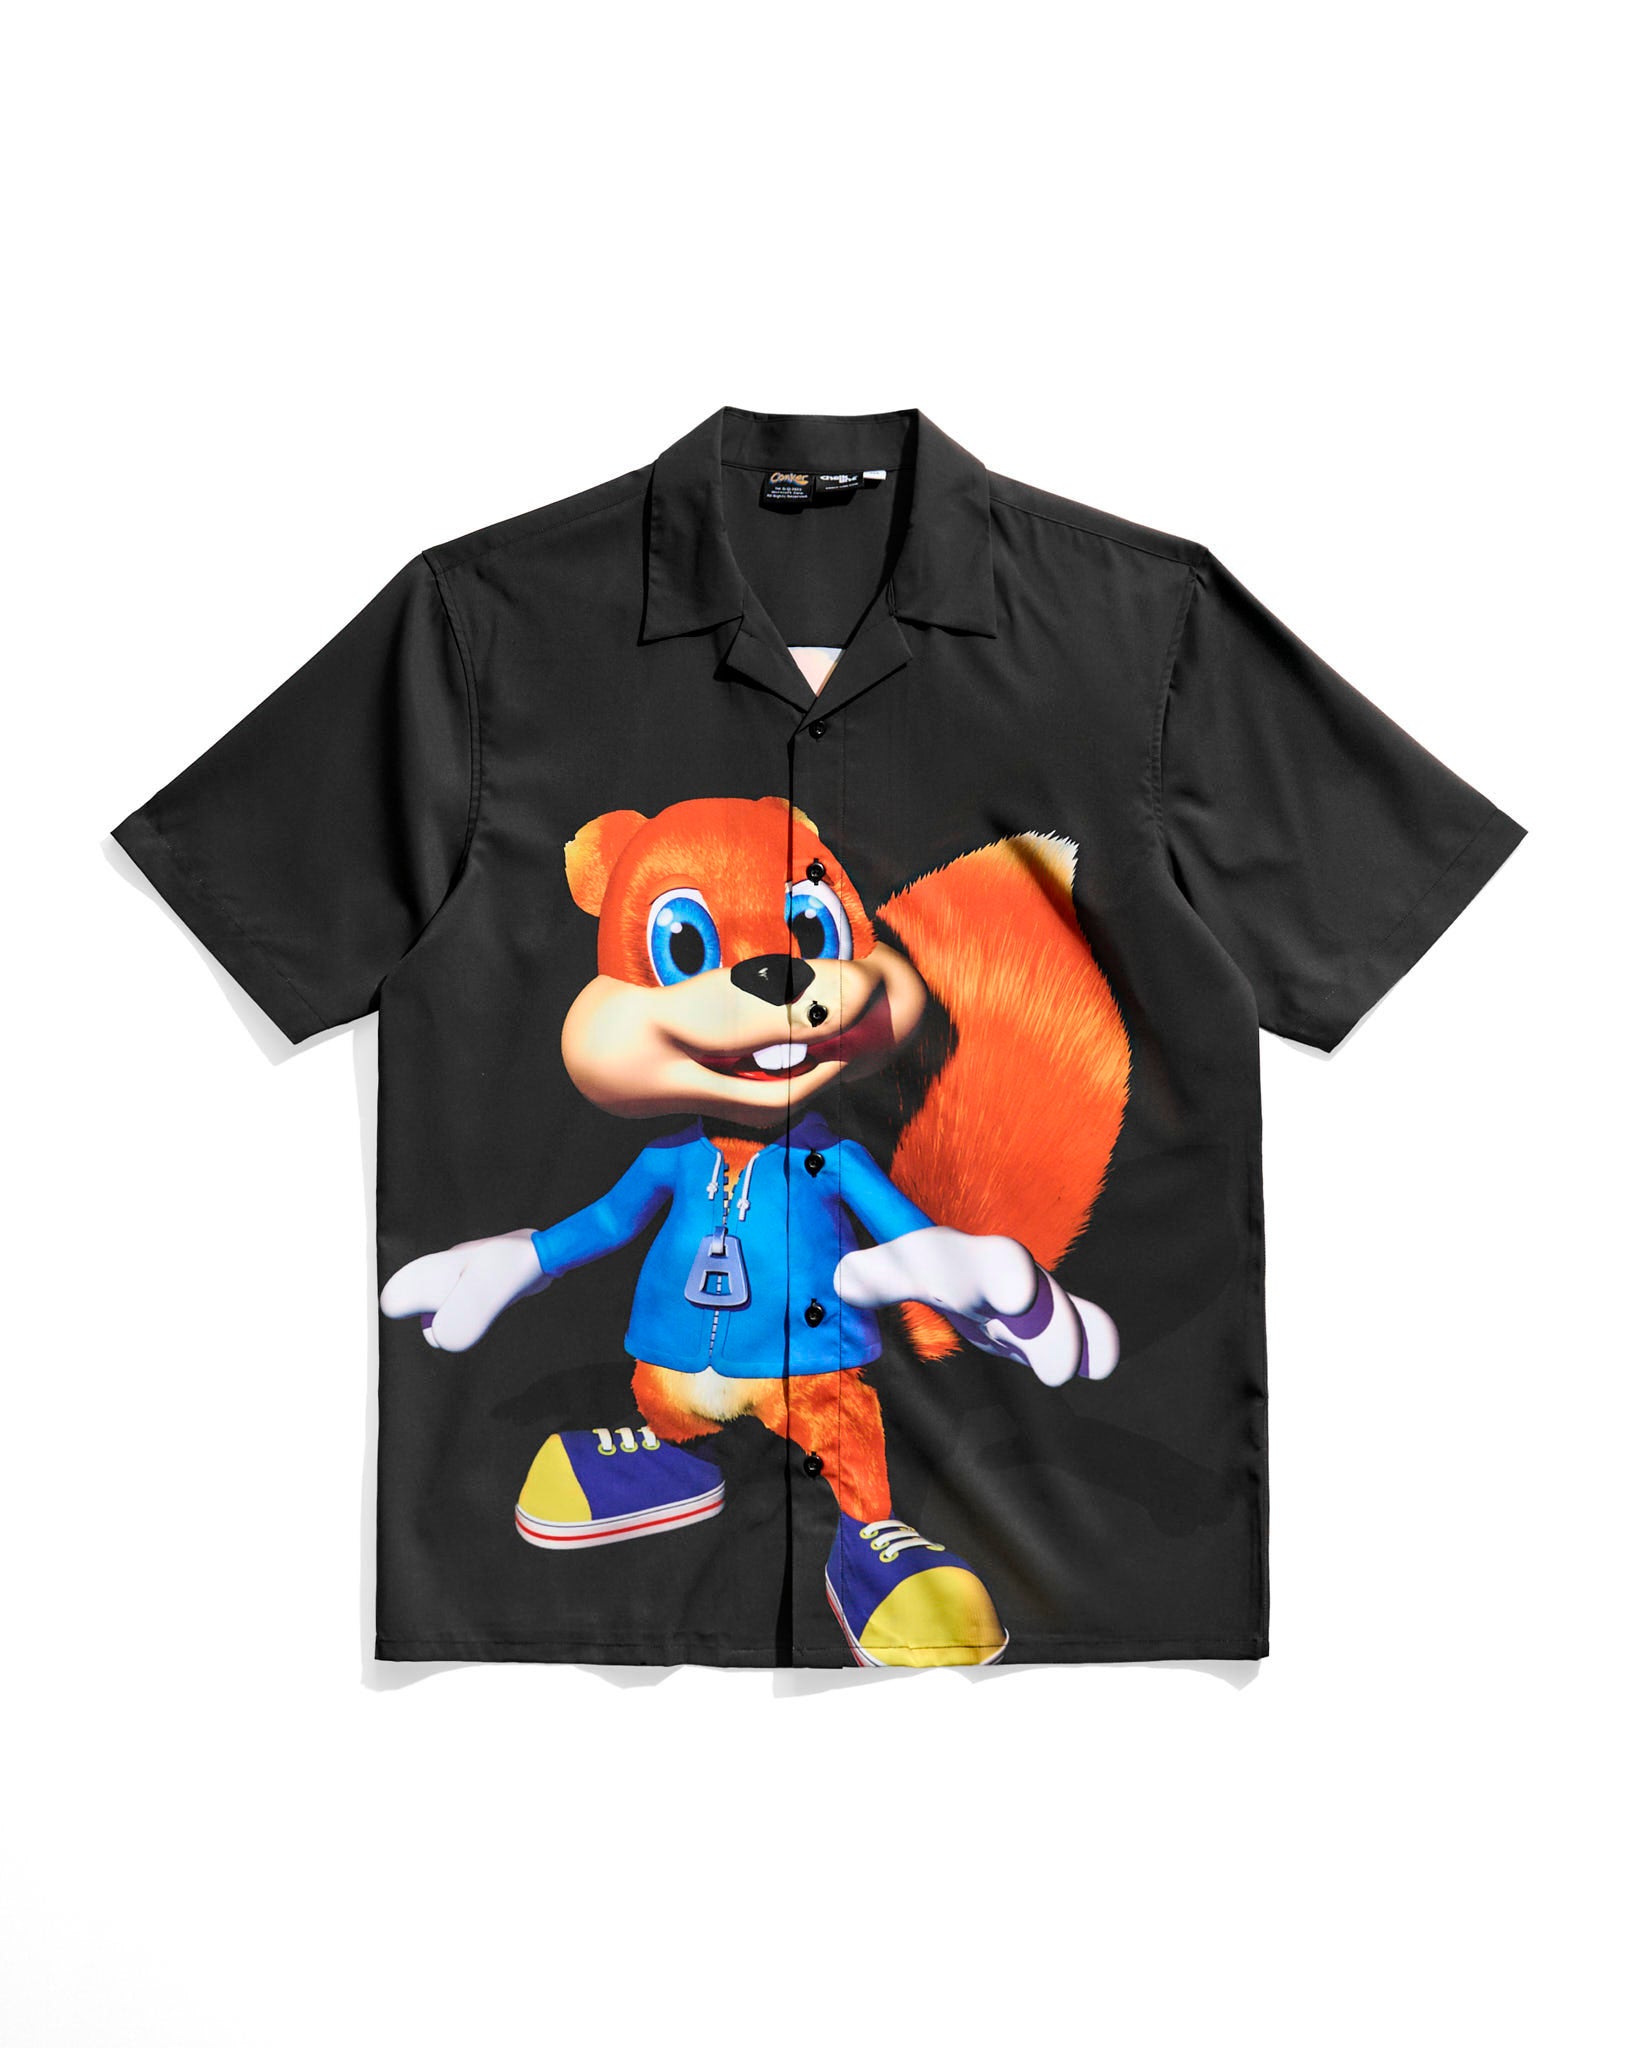 Conker's Bad Fur Day Button Up Shirt